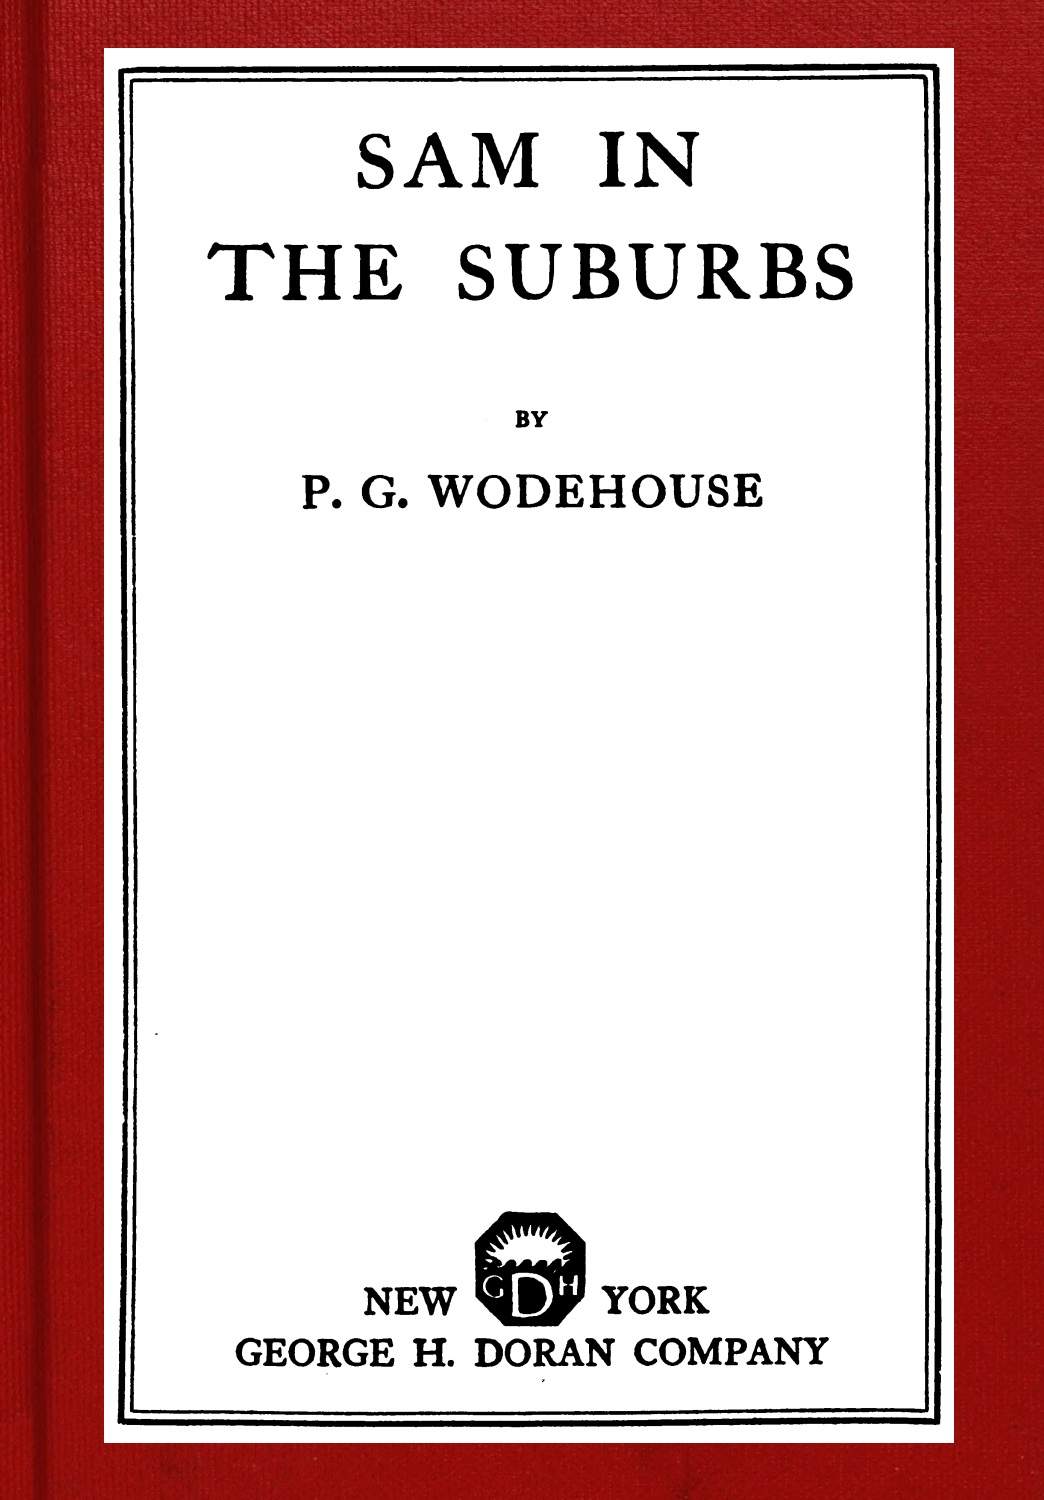 The Project Gutenberg eBook of Sam in the Suburbs, by P photo image